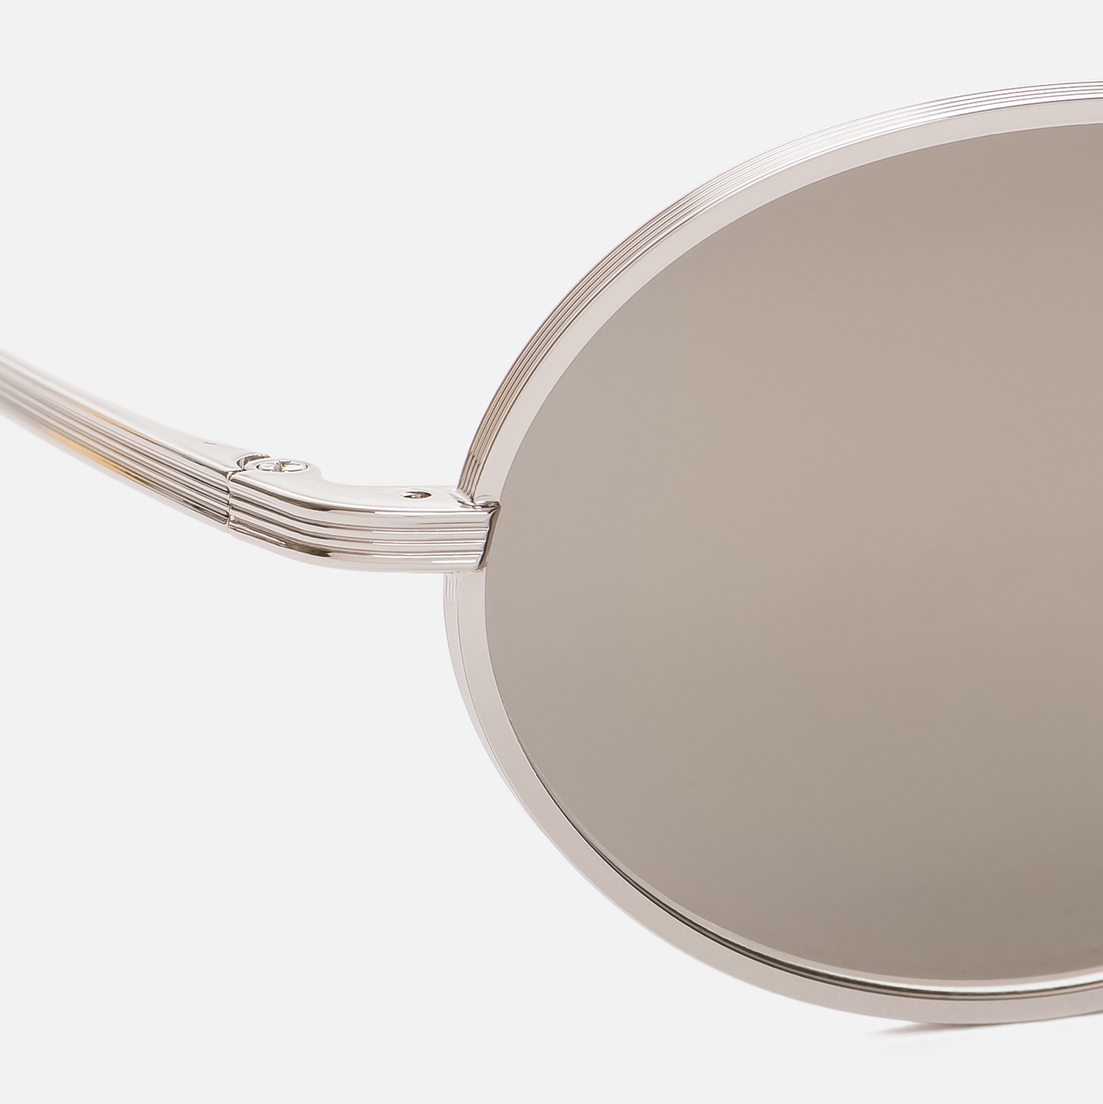 Oliver Peoples Солнцезащитные очки The Row